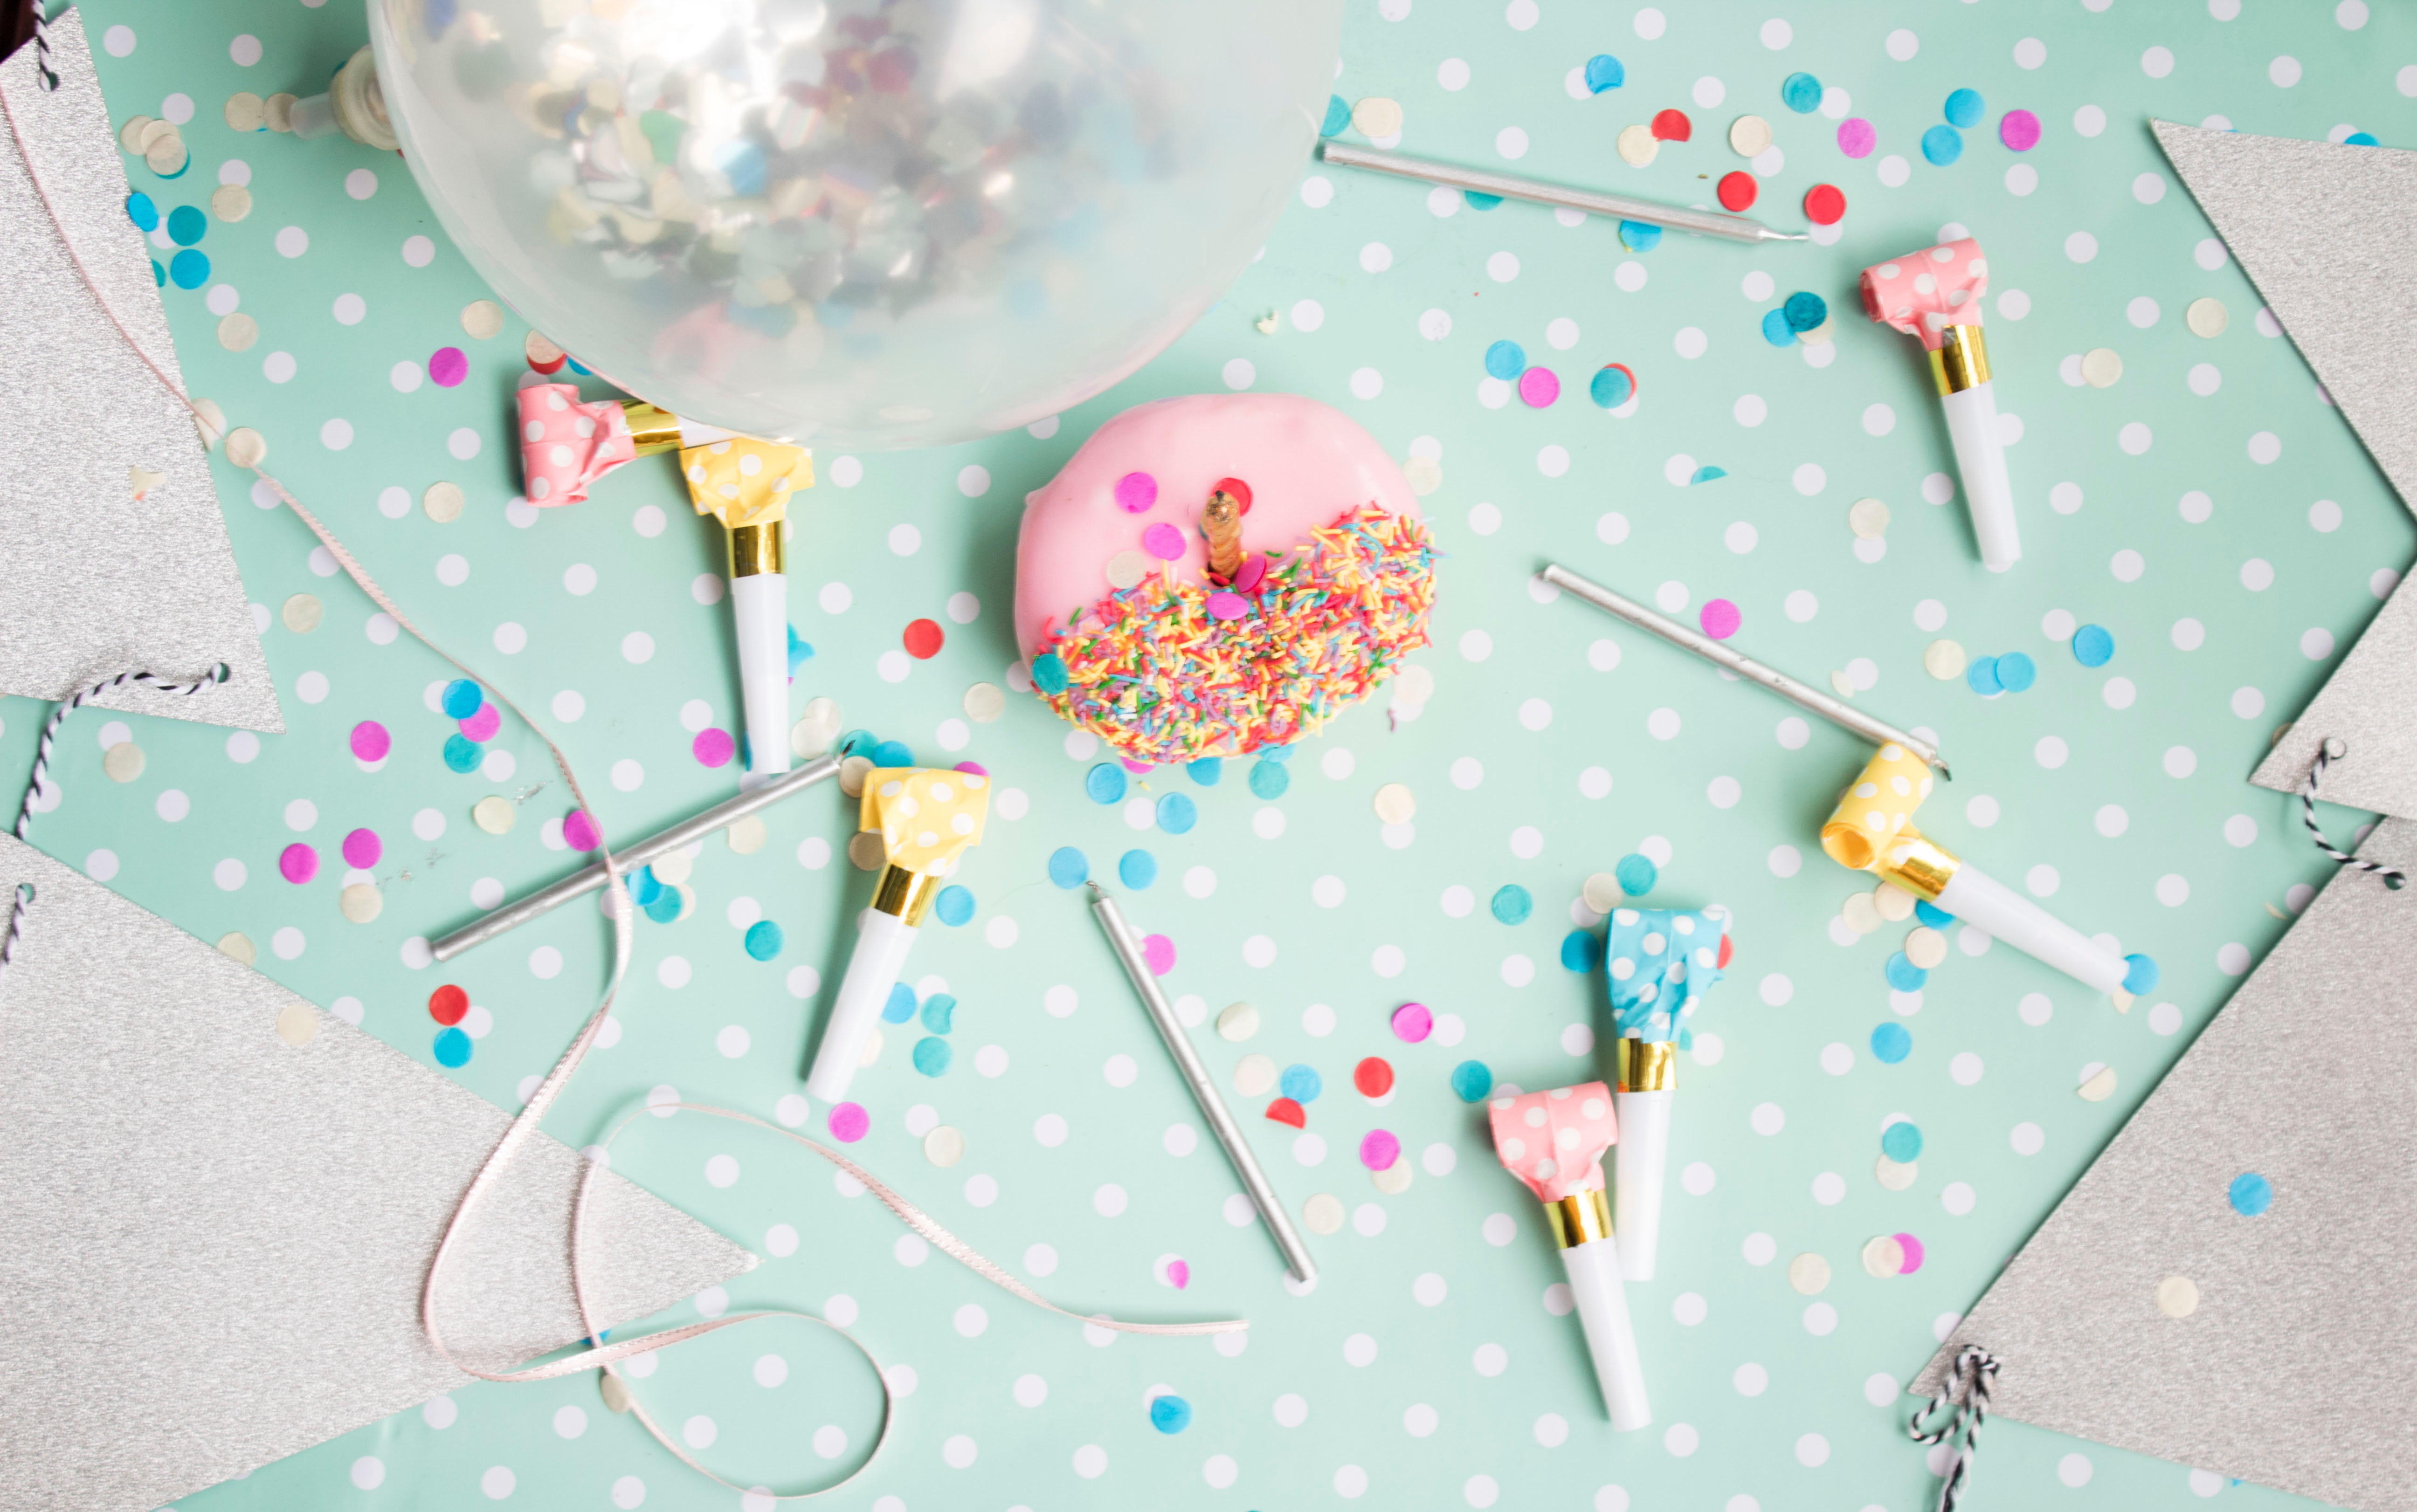 Kids party scene with confetti, donuts and balloon